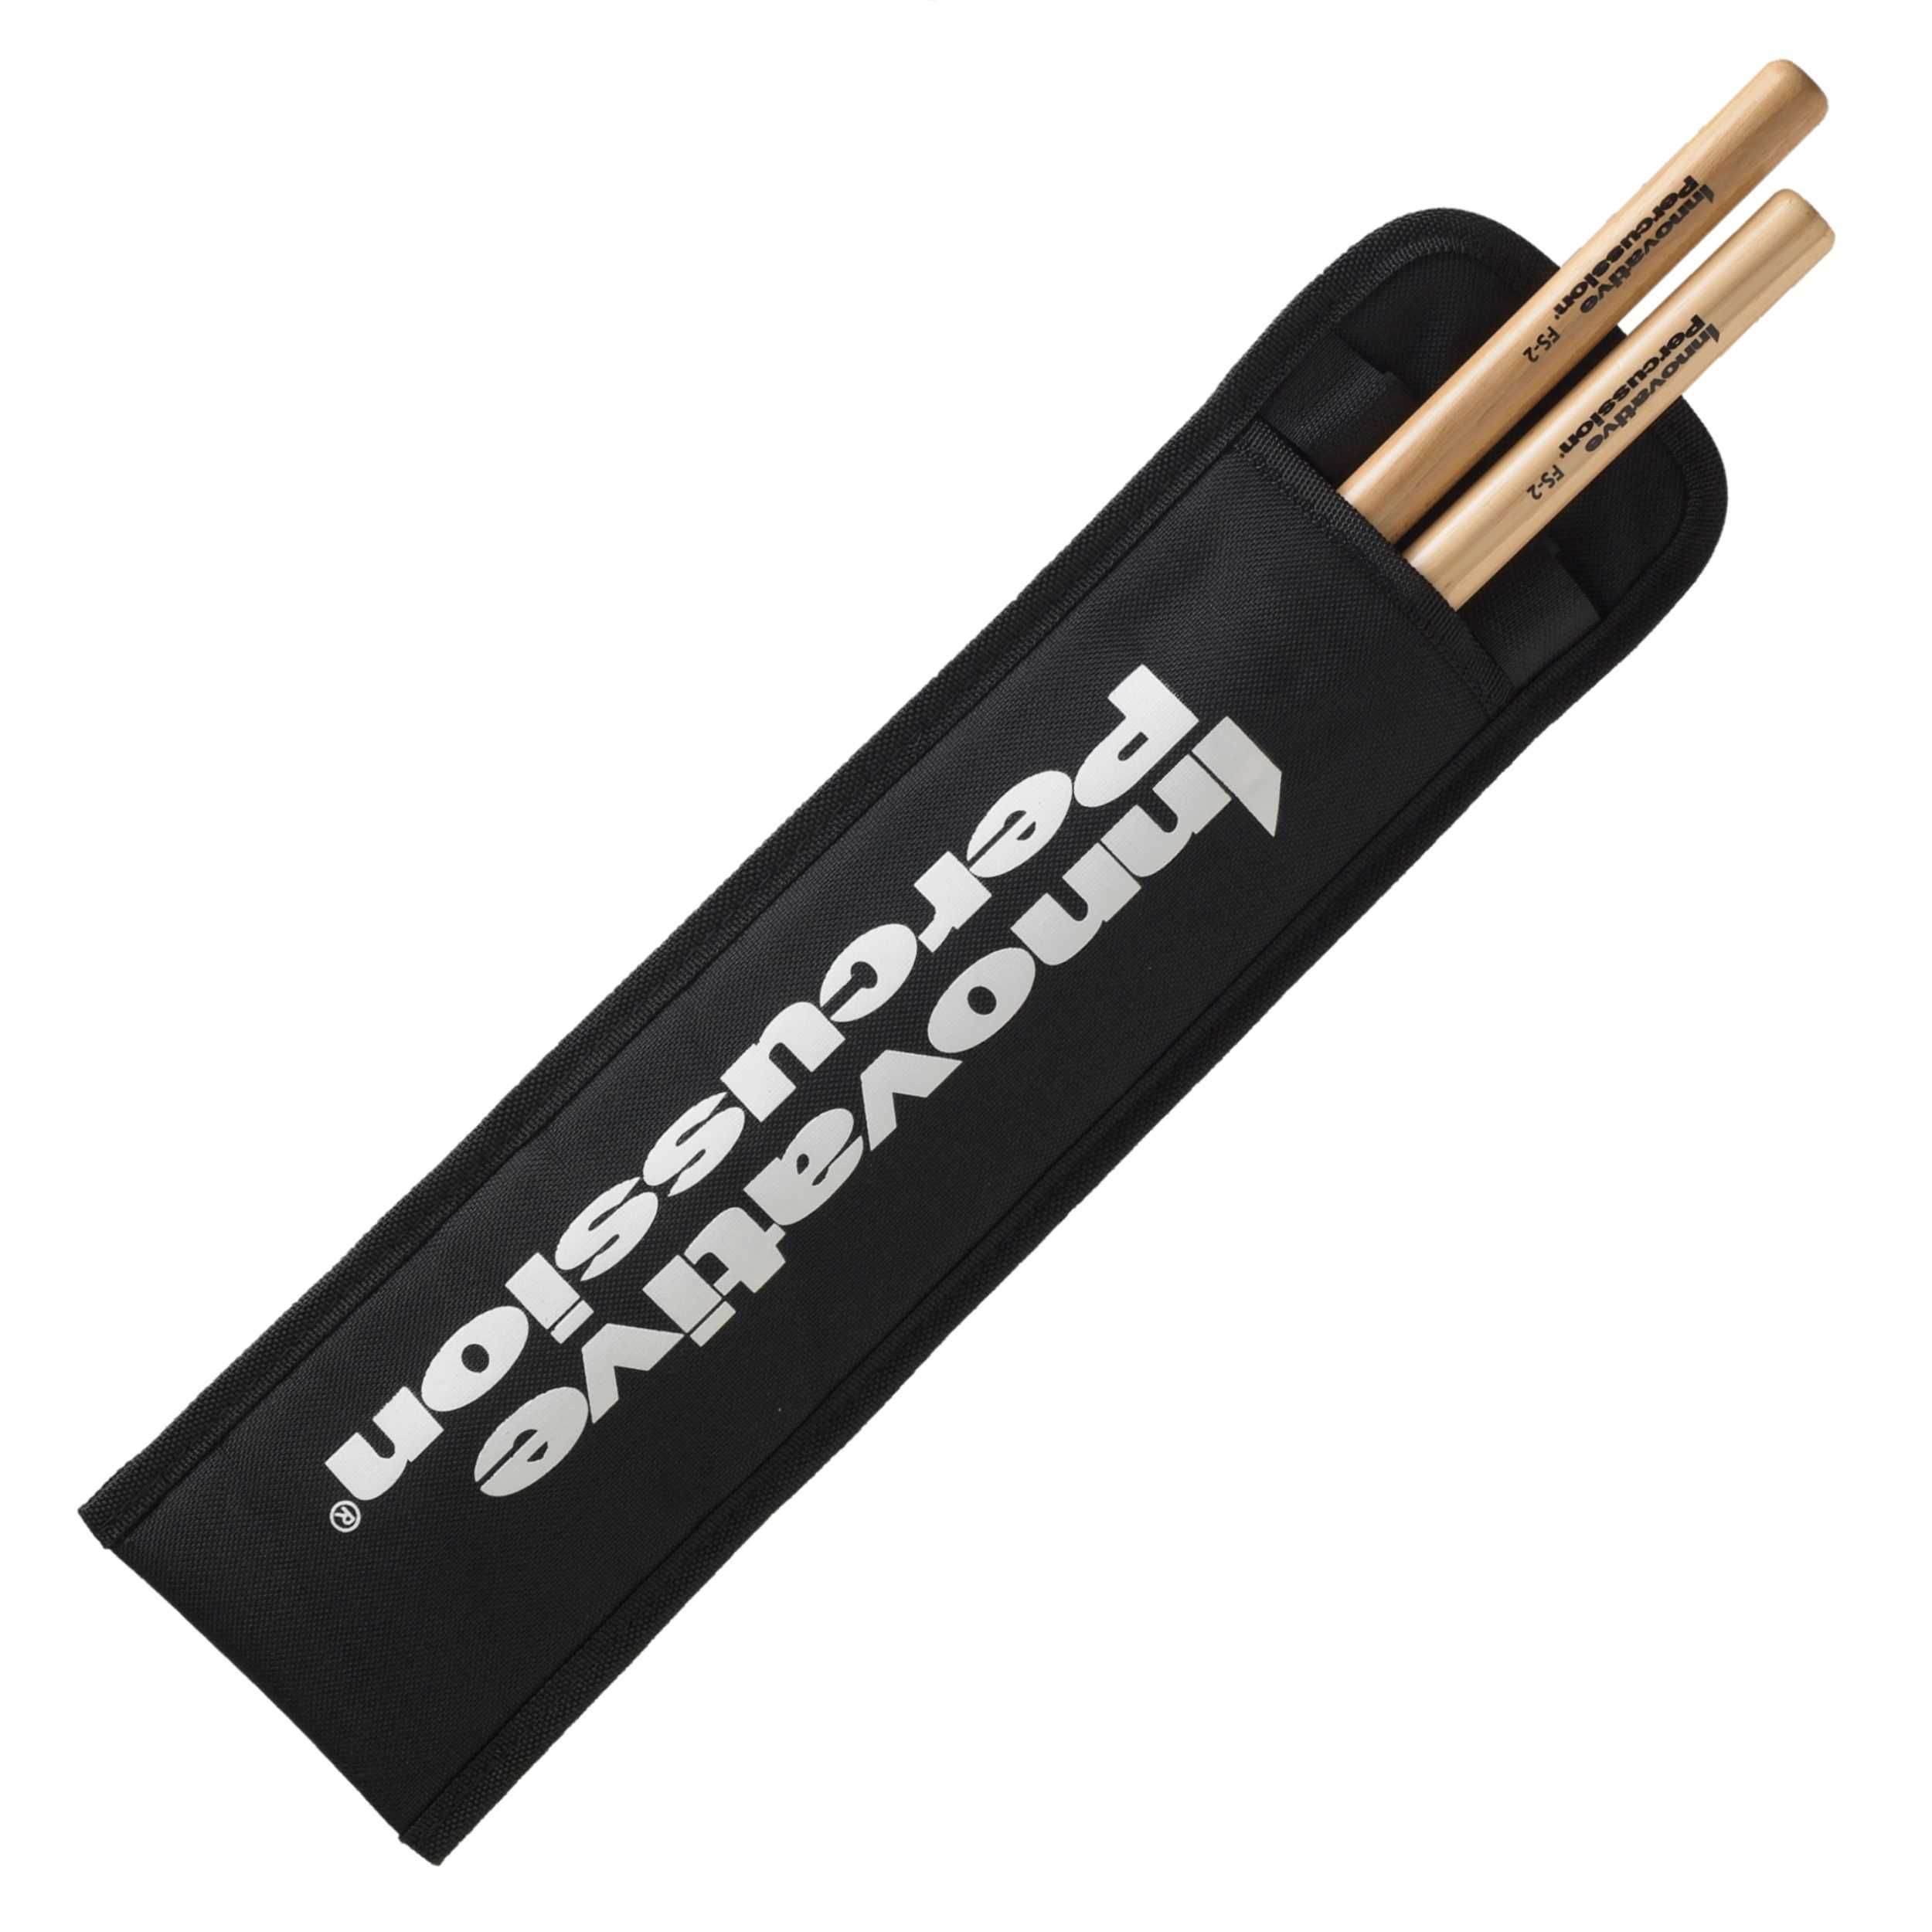 Innovative Percussion SB-1 Marching Drumstick Bag for 1 pair